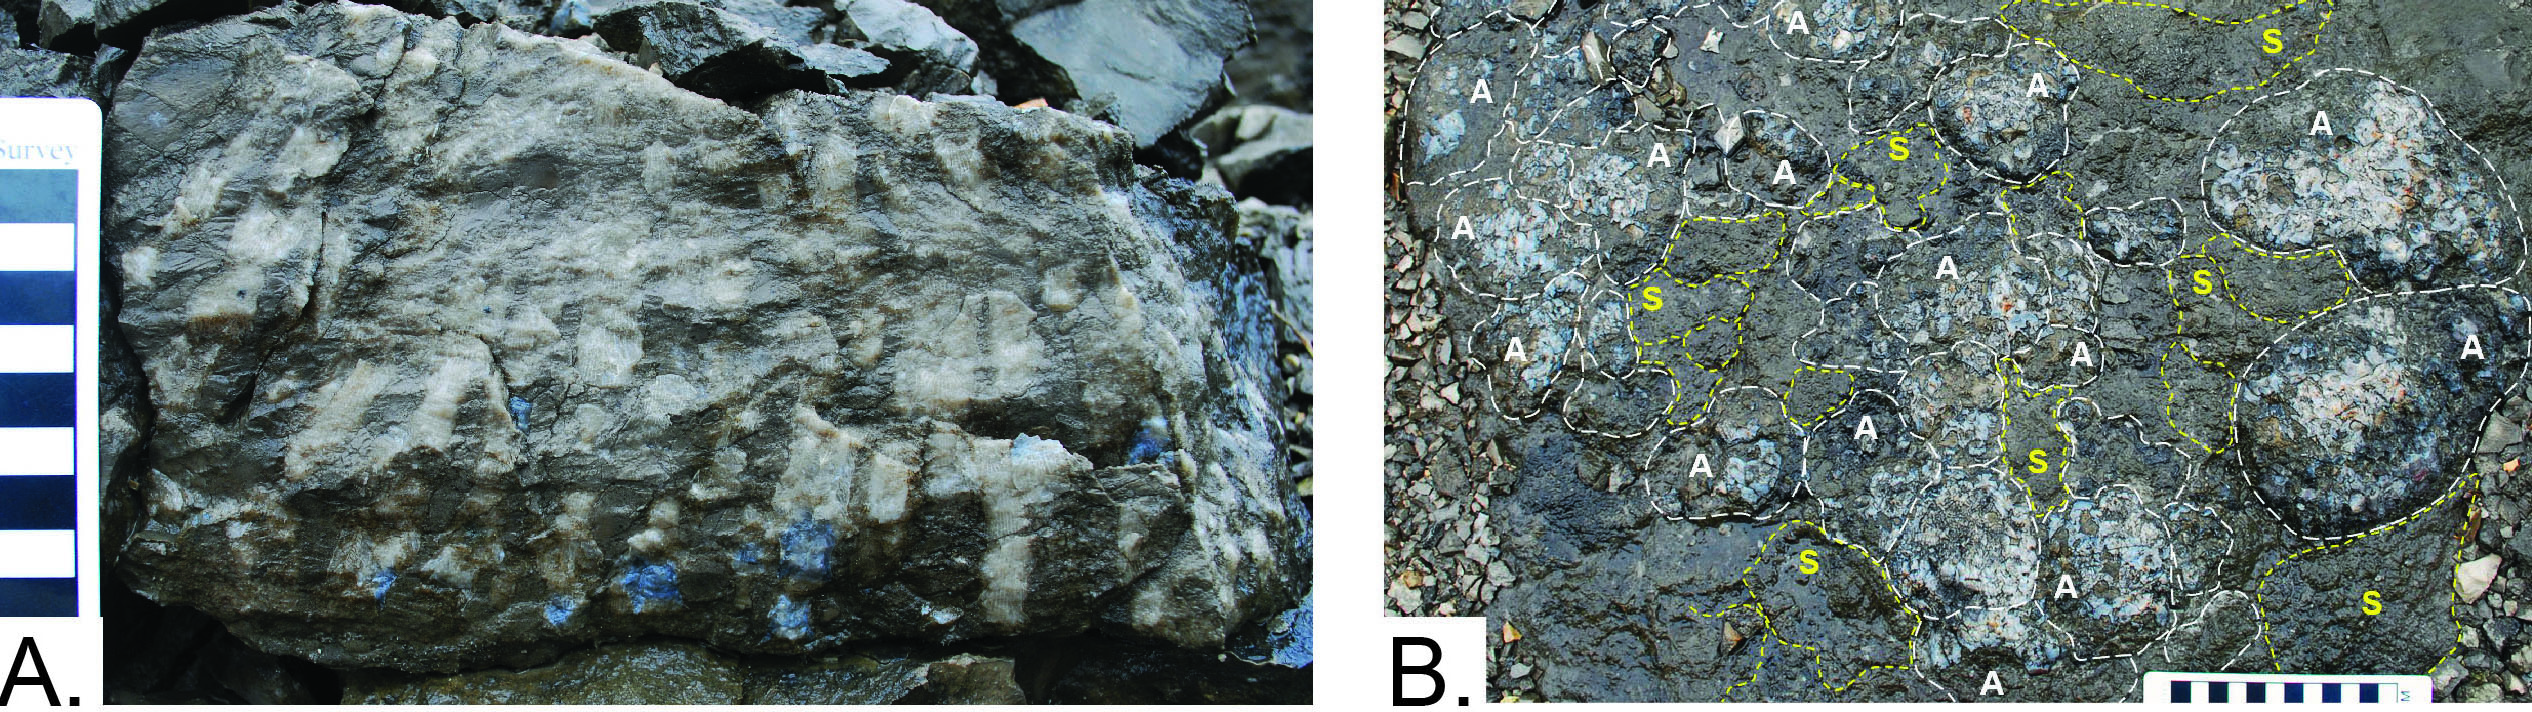 Examples of silicified Acrocyathus mounds in outcrops of the St. Louis Limestone, south-central Kentucky. (A) Detail of A. proliferum colony from the side in bedrock. Note corallites (white tubes) are separated by thin matrix rock. (B) Bedding-plane surface with tops of small Acrocyathus (A) mounds and the pipe-organ tabulate coral, Syringopora (S) (outlines with dashed lines) preserved in life position. The bluish color is from chert replacement of the corals. Scale in centimeters.